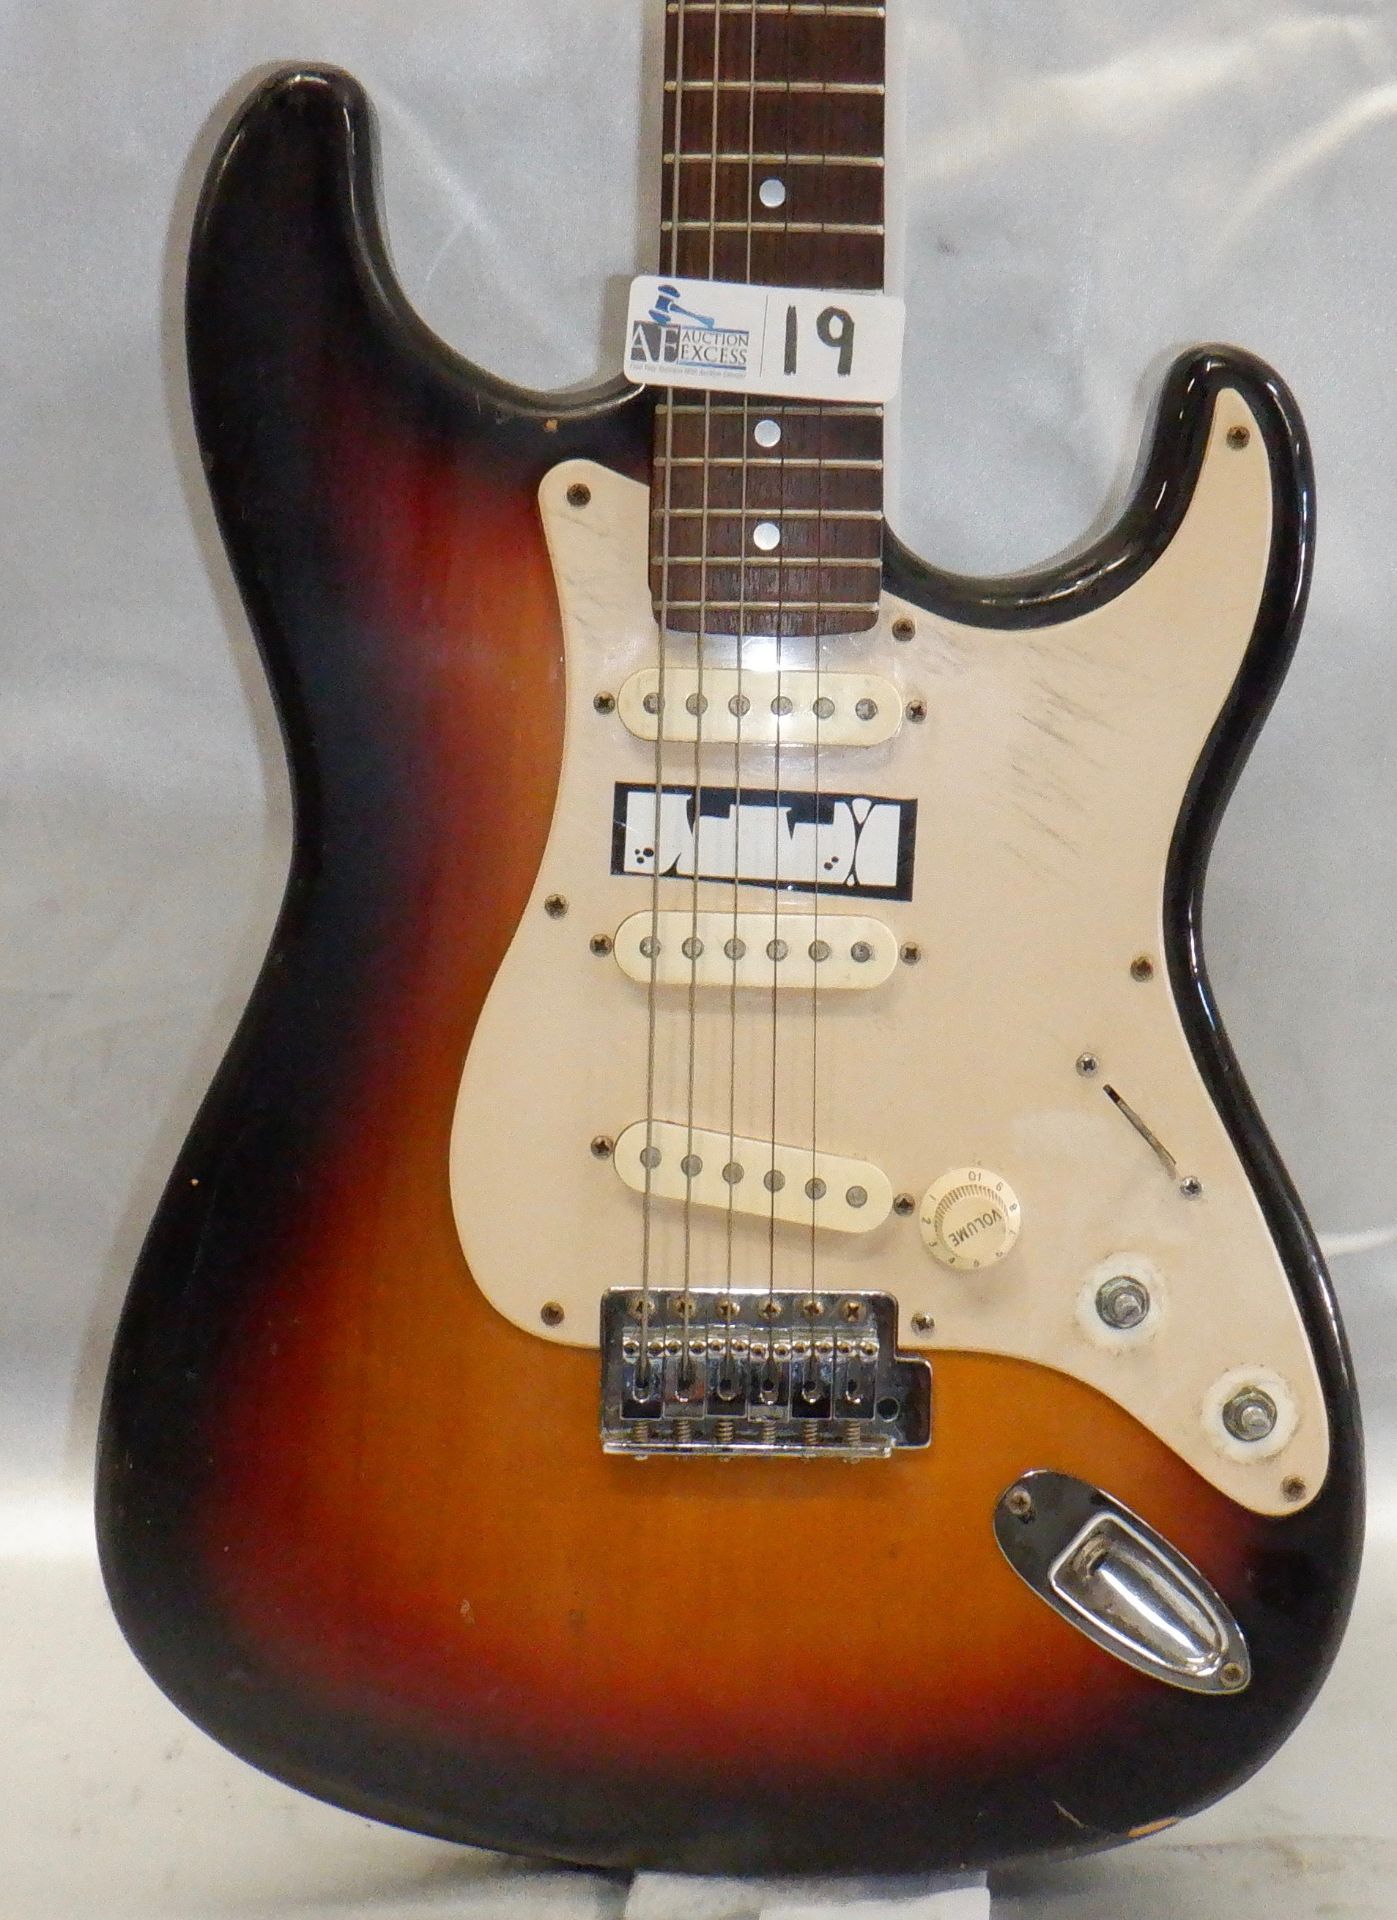 SQUIRE BY FENDER STRATOCASTER BULLET SERIES GUITAR WITH CASE - Image 3 of 6